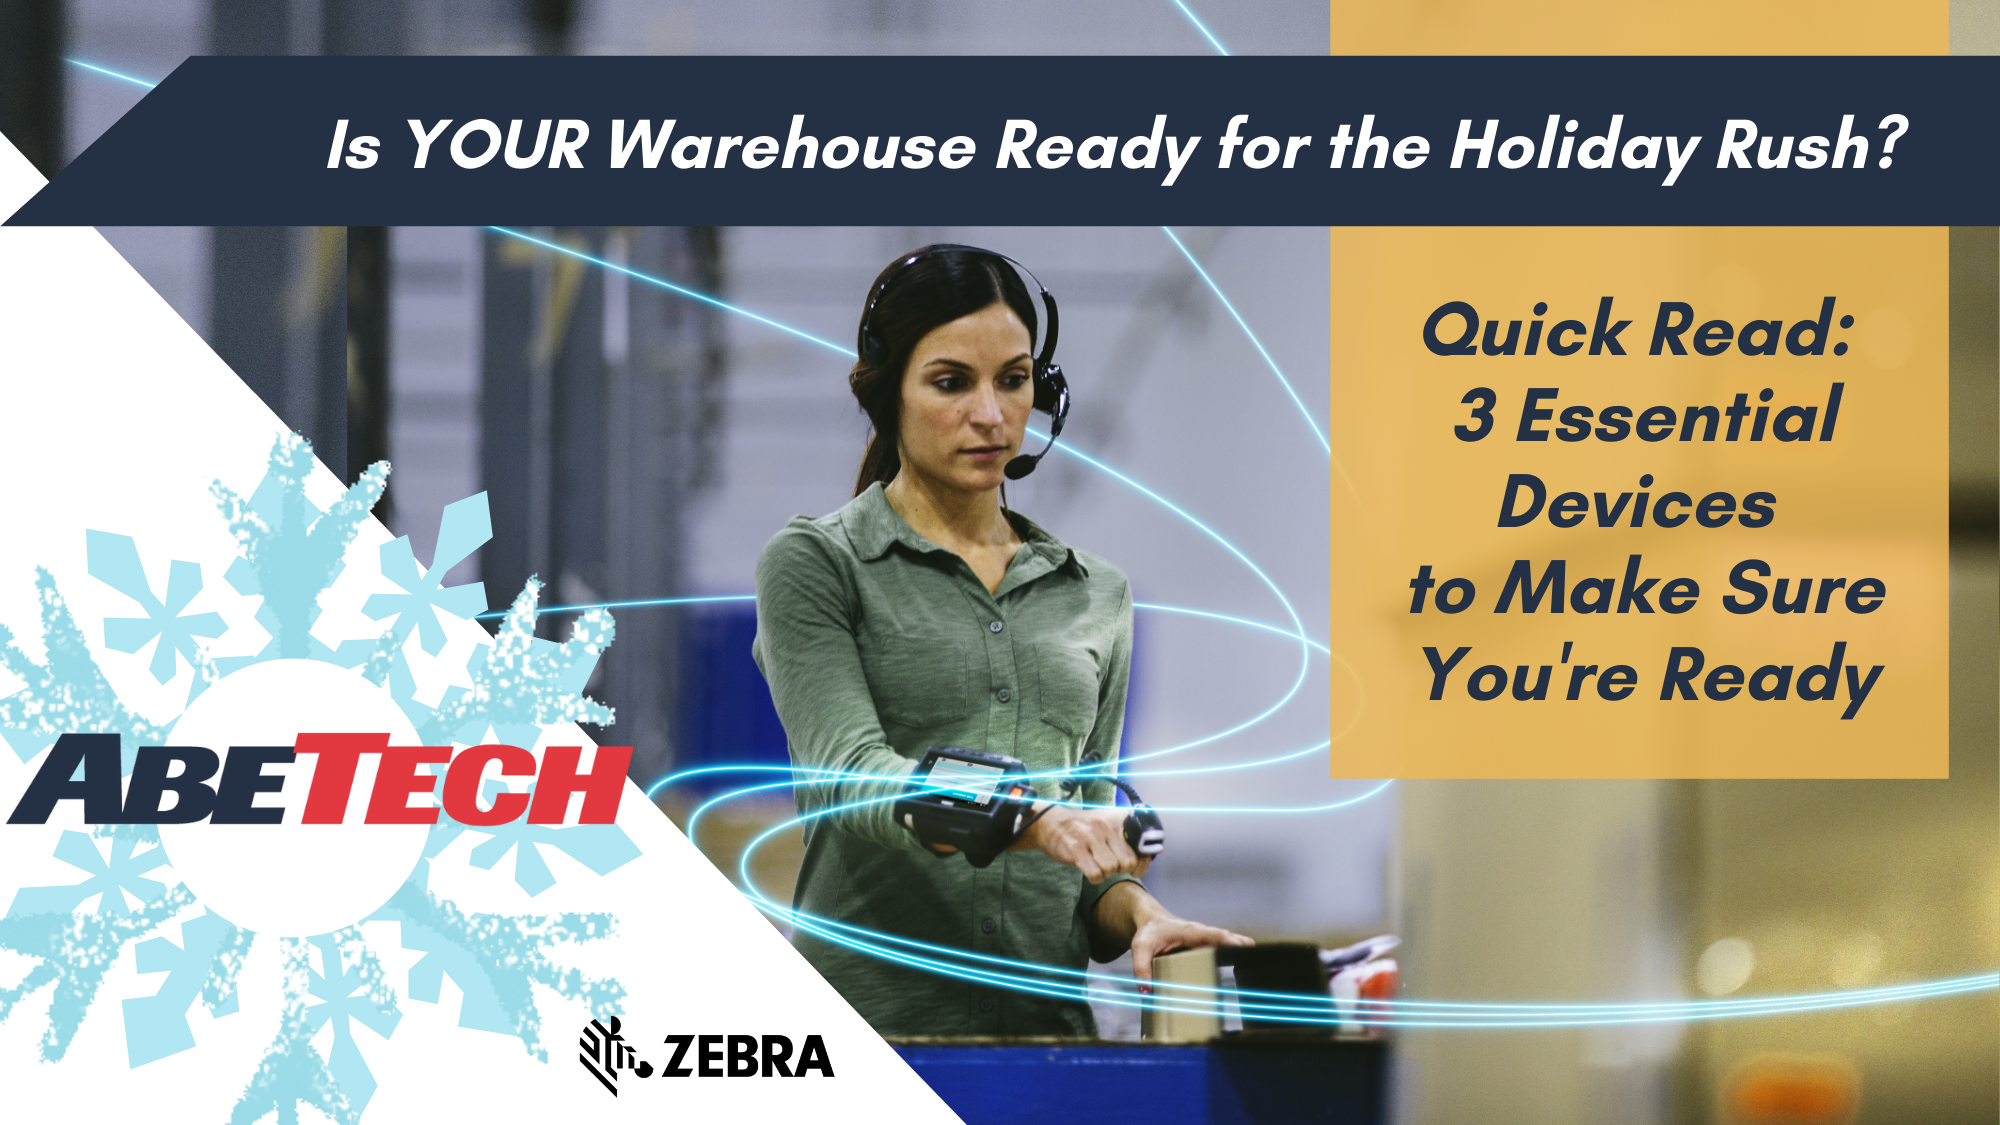 Warehouse Technology that will Prepare You for the Busy Season